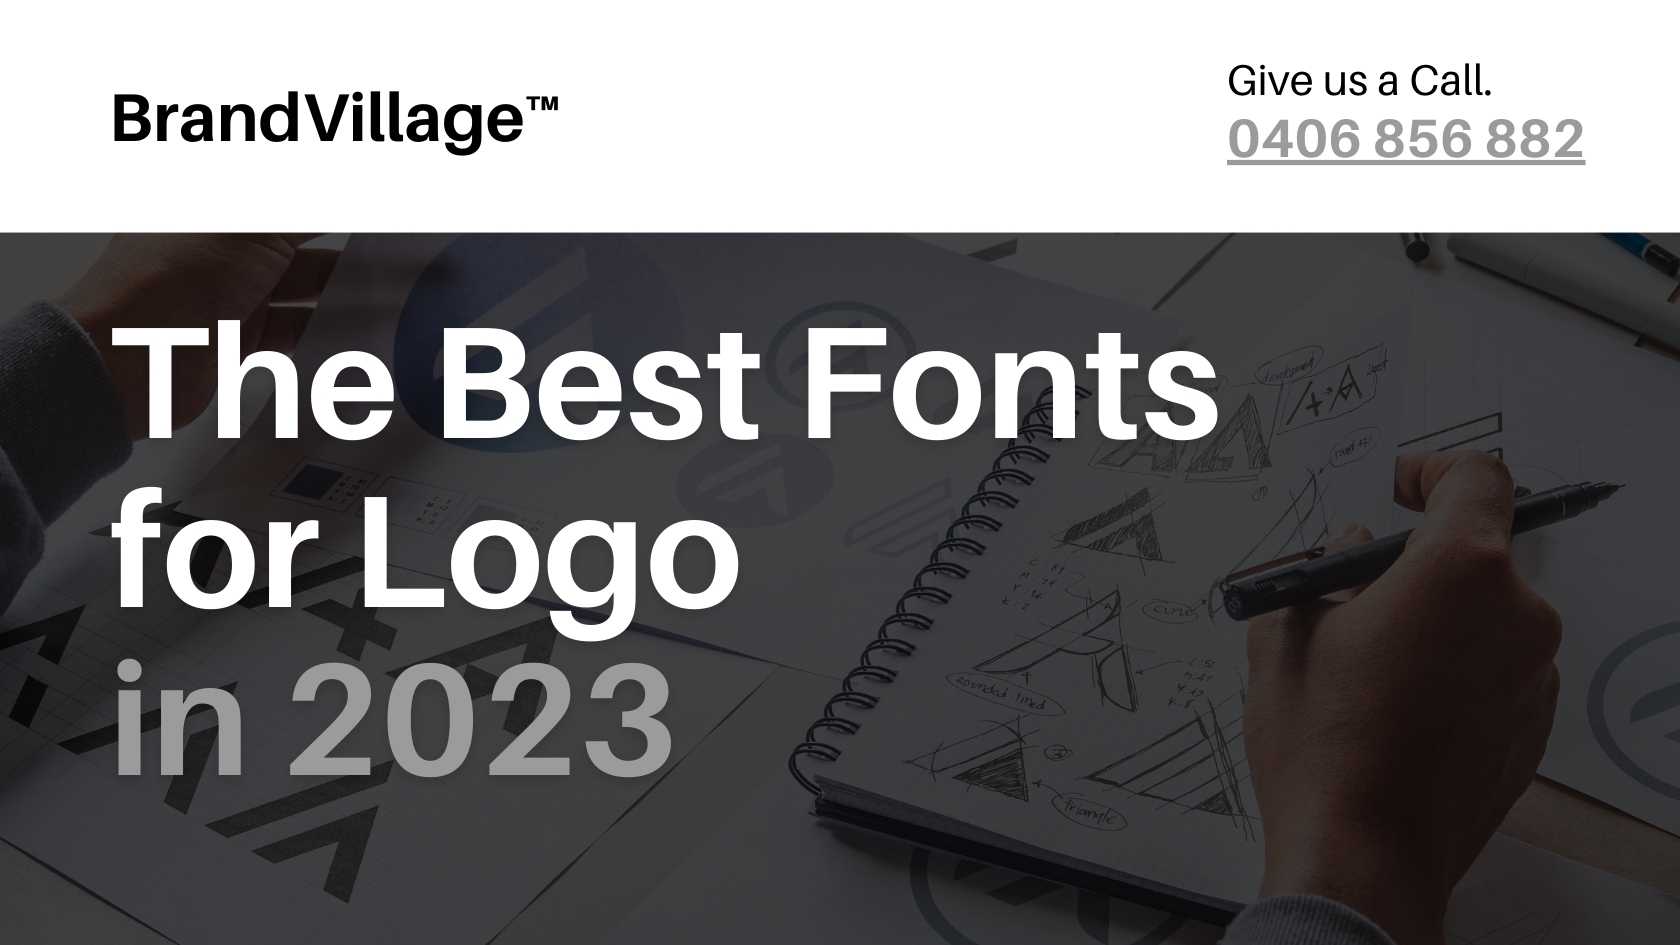 The Best Fonts for Logo in 2023